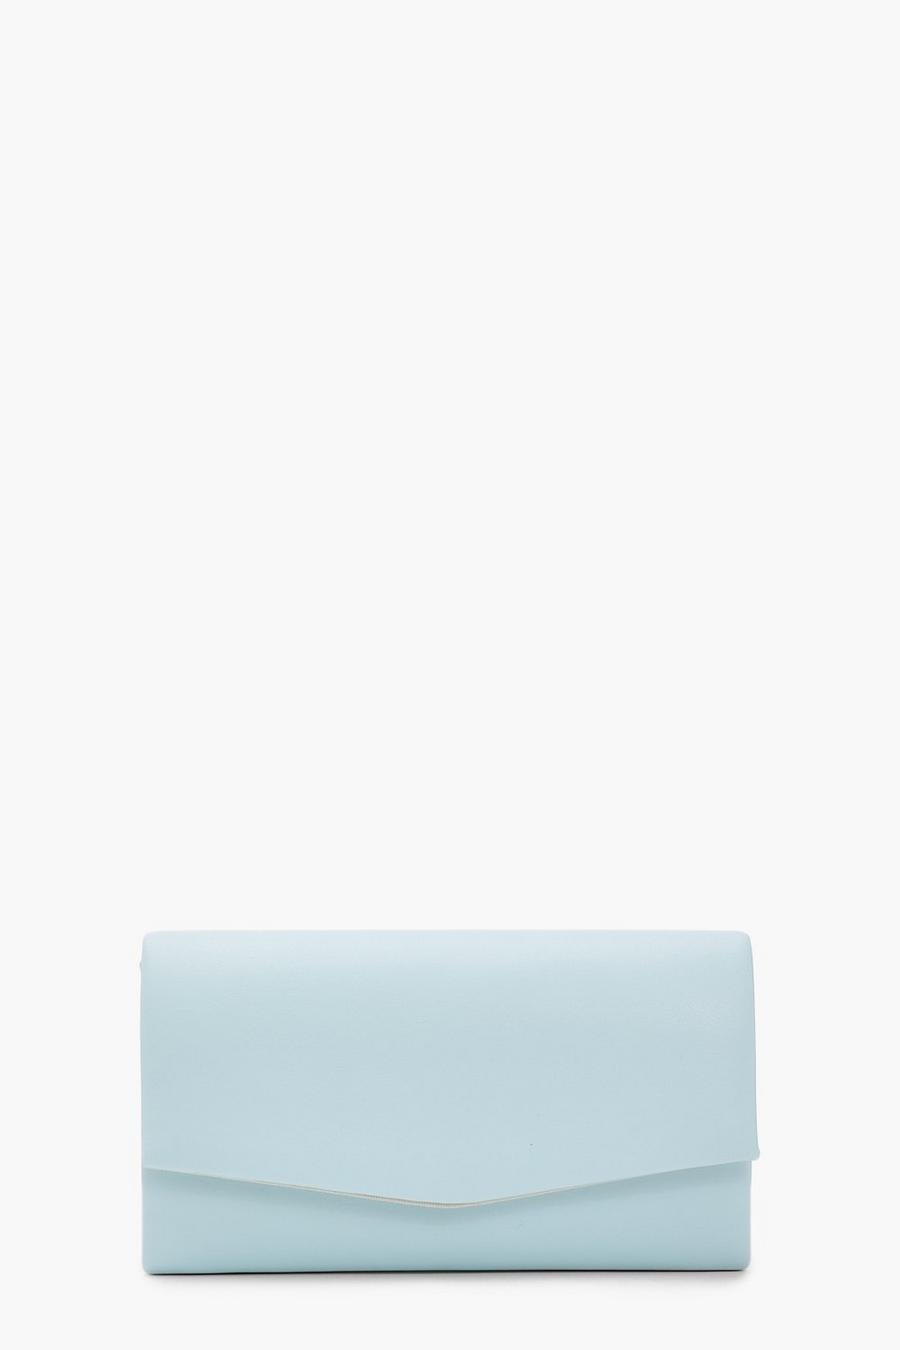 Turquoise blue Basic Structured Clutch image number 1